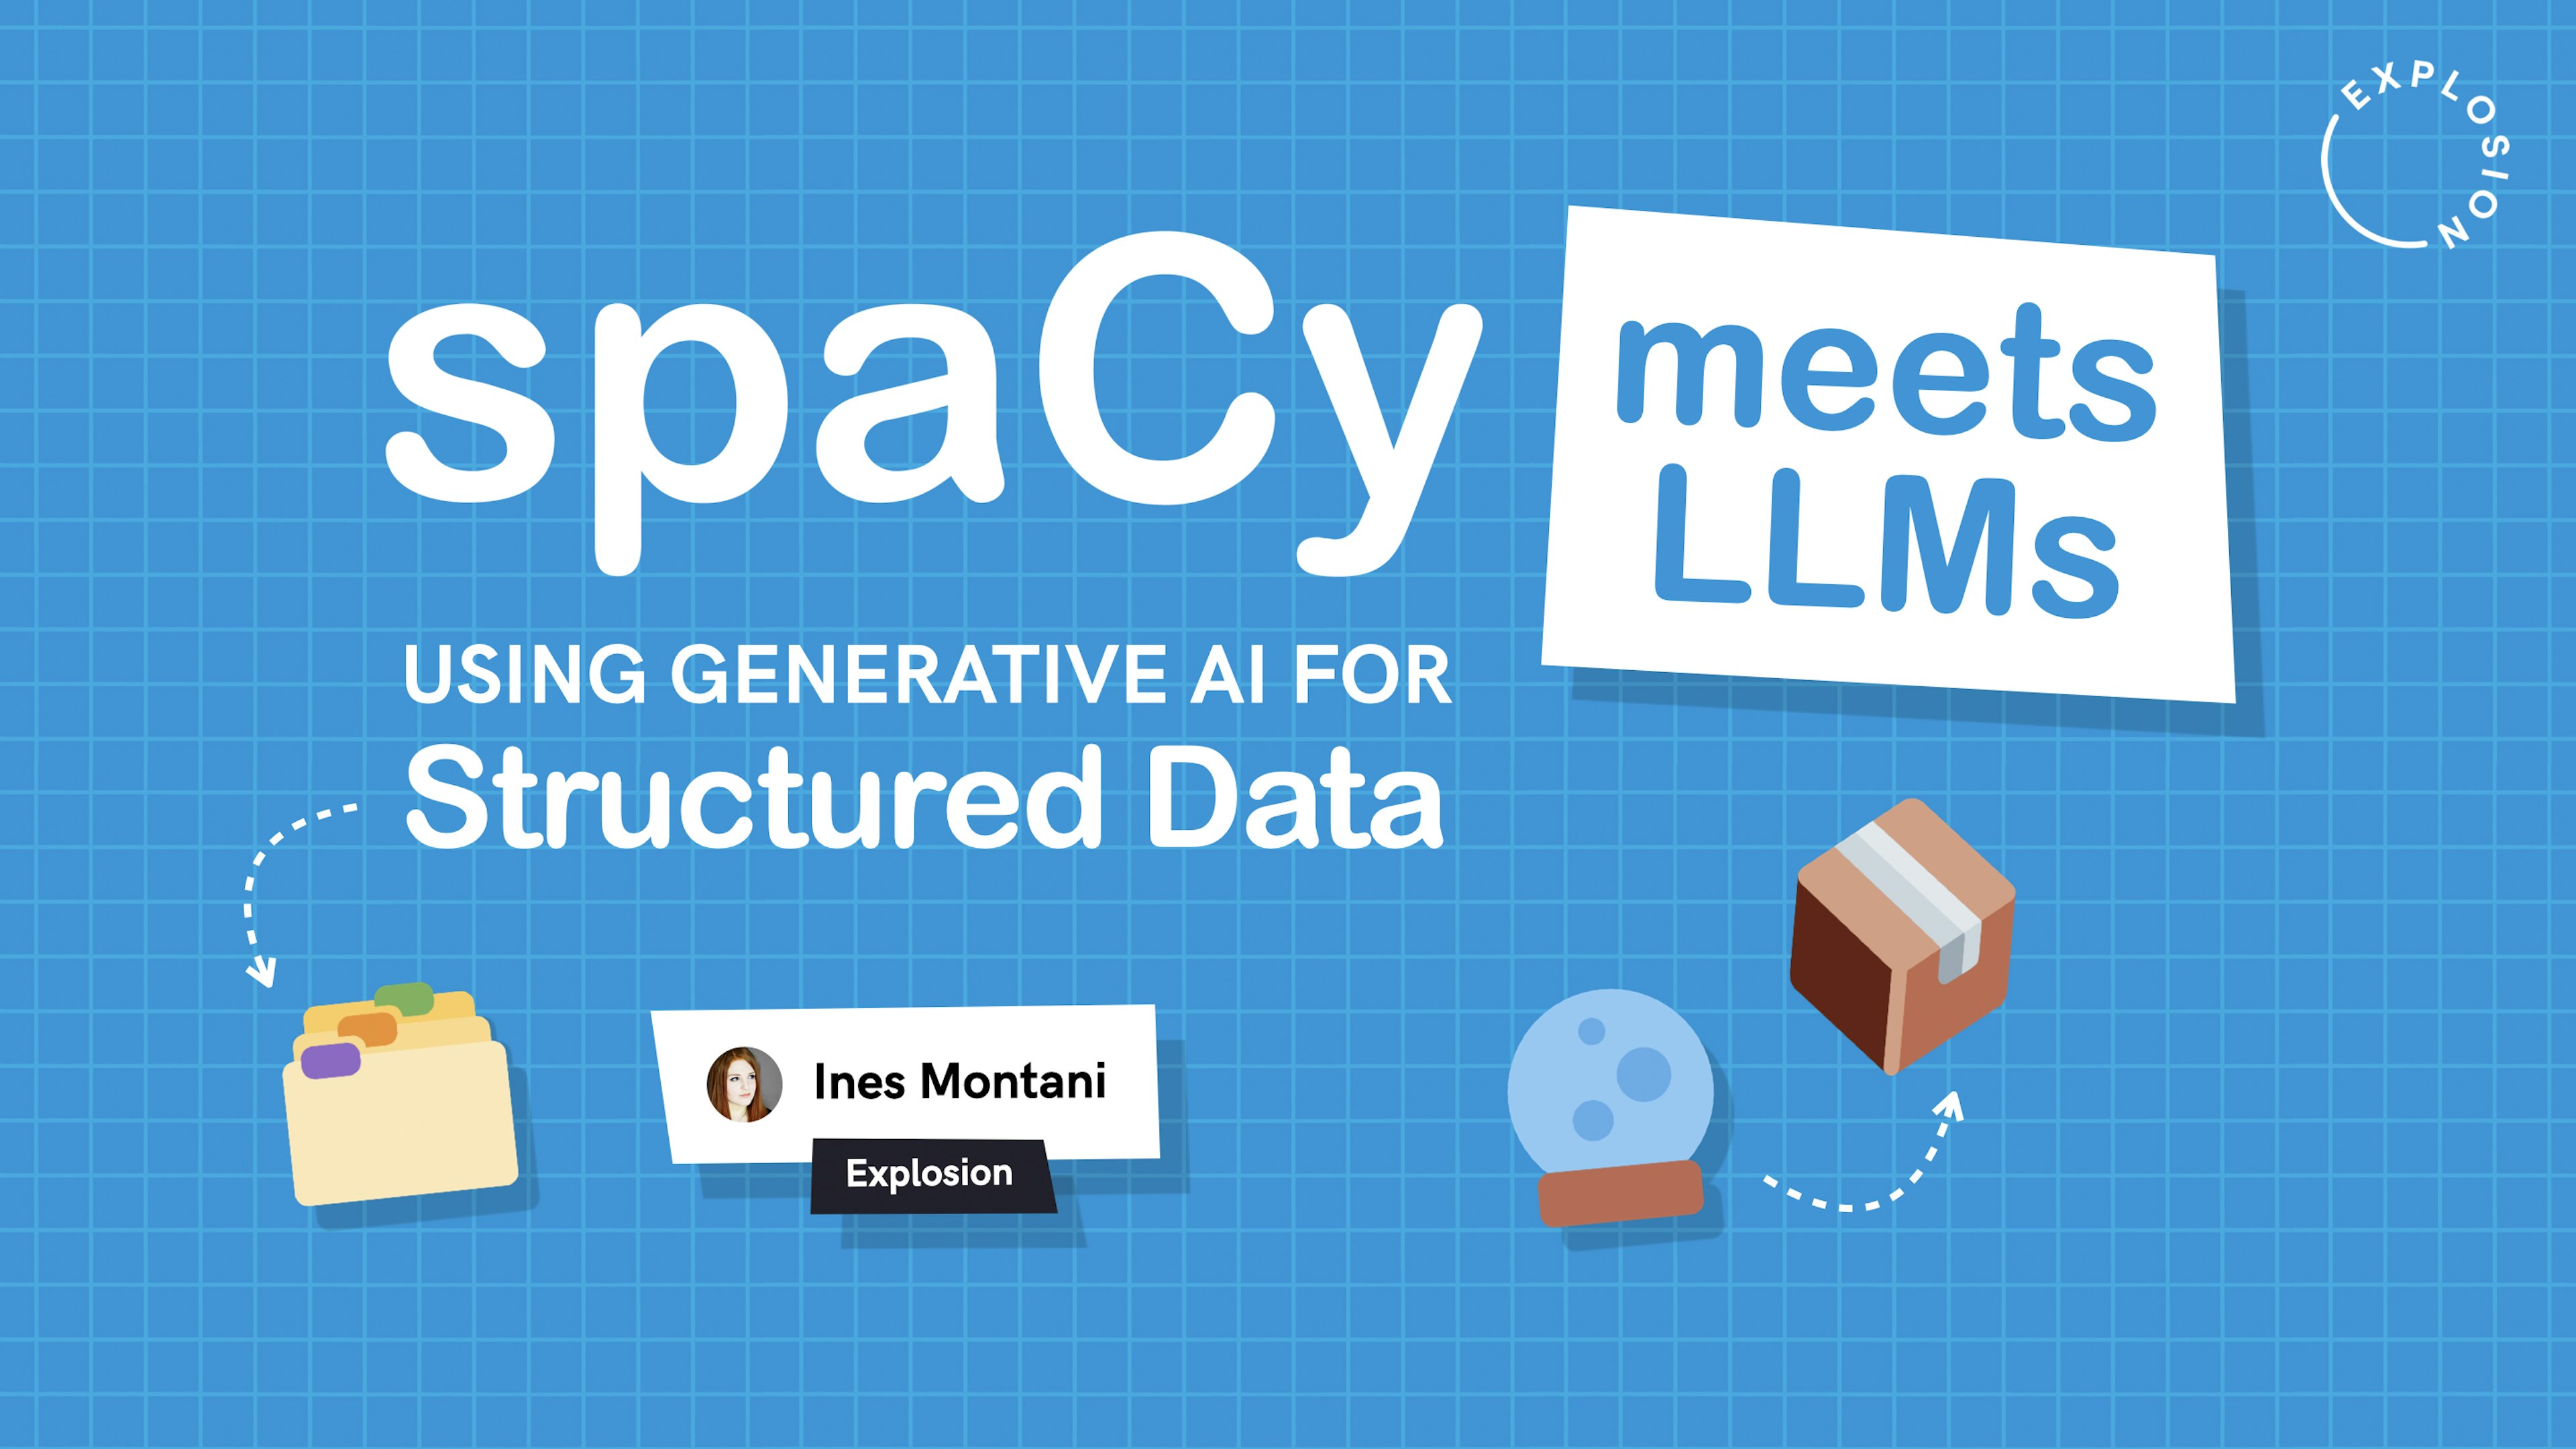 spaCy meets LLMs: Using Generative AI for Structured Data